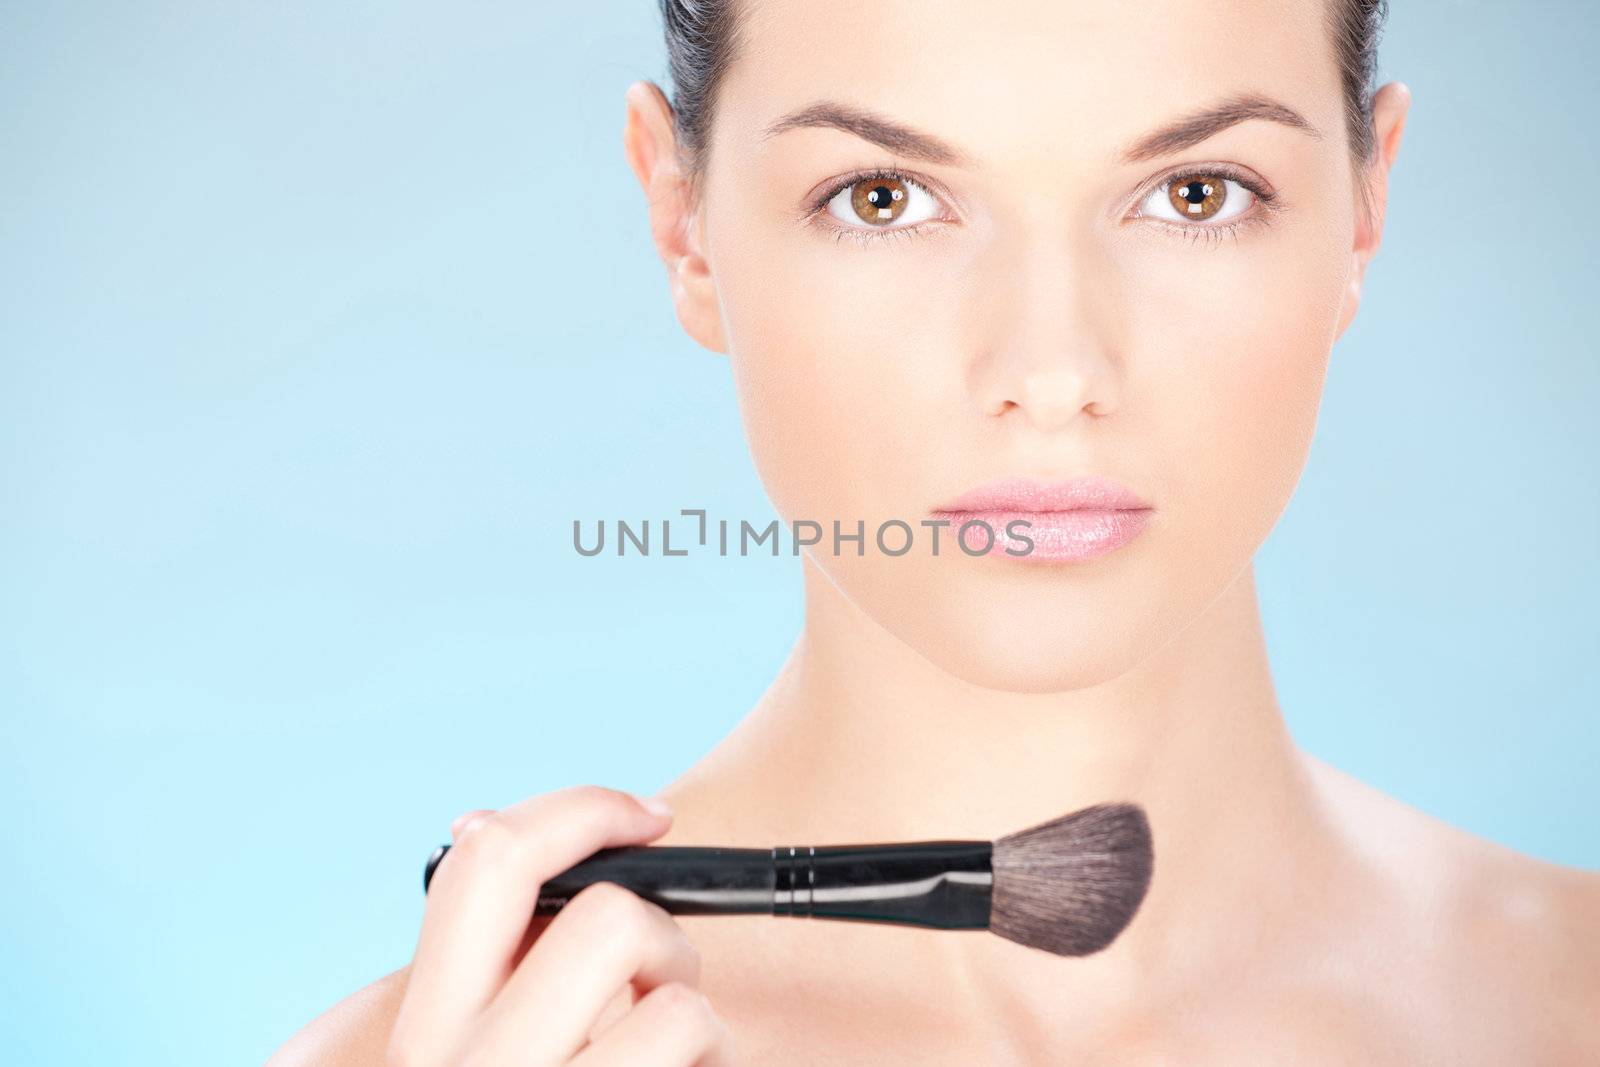 Portrait of a pretty young woman holding powder brush